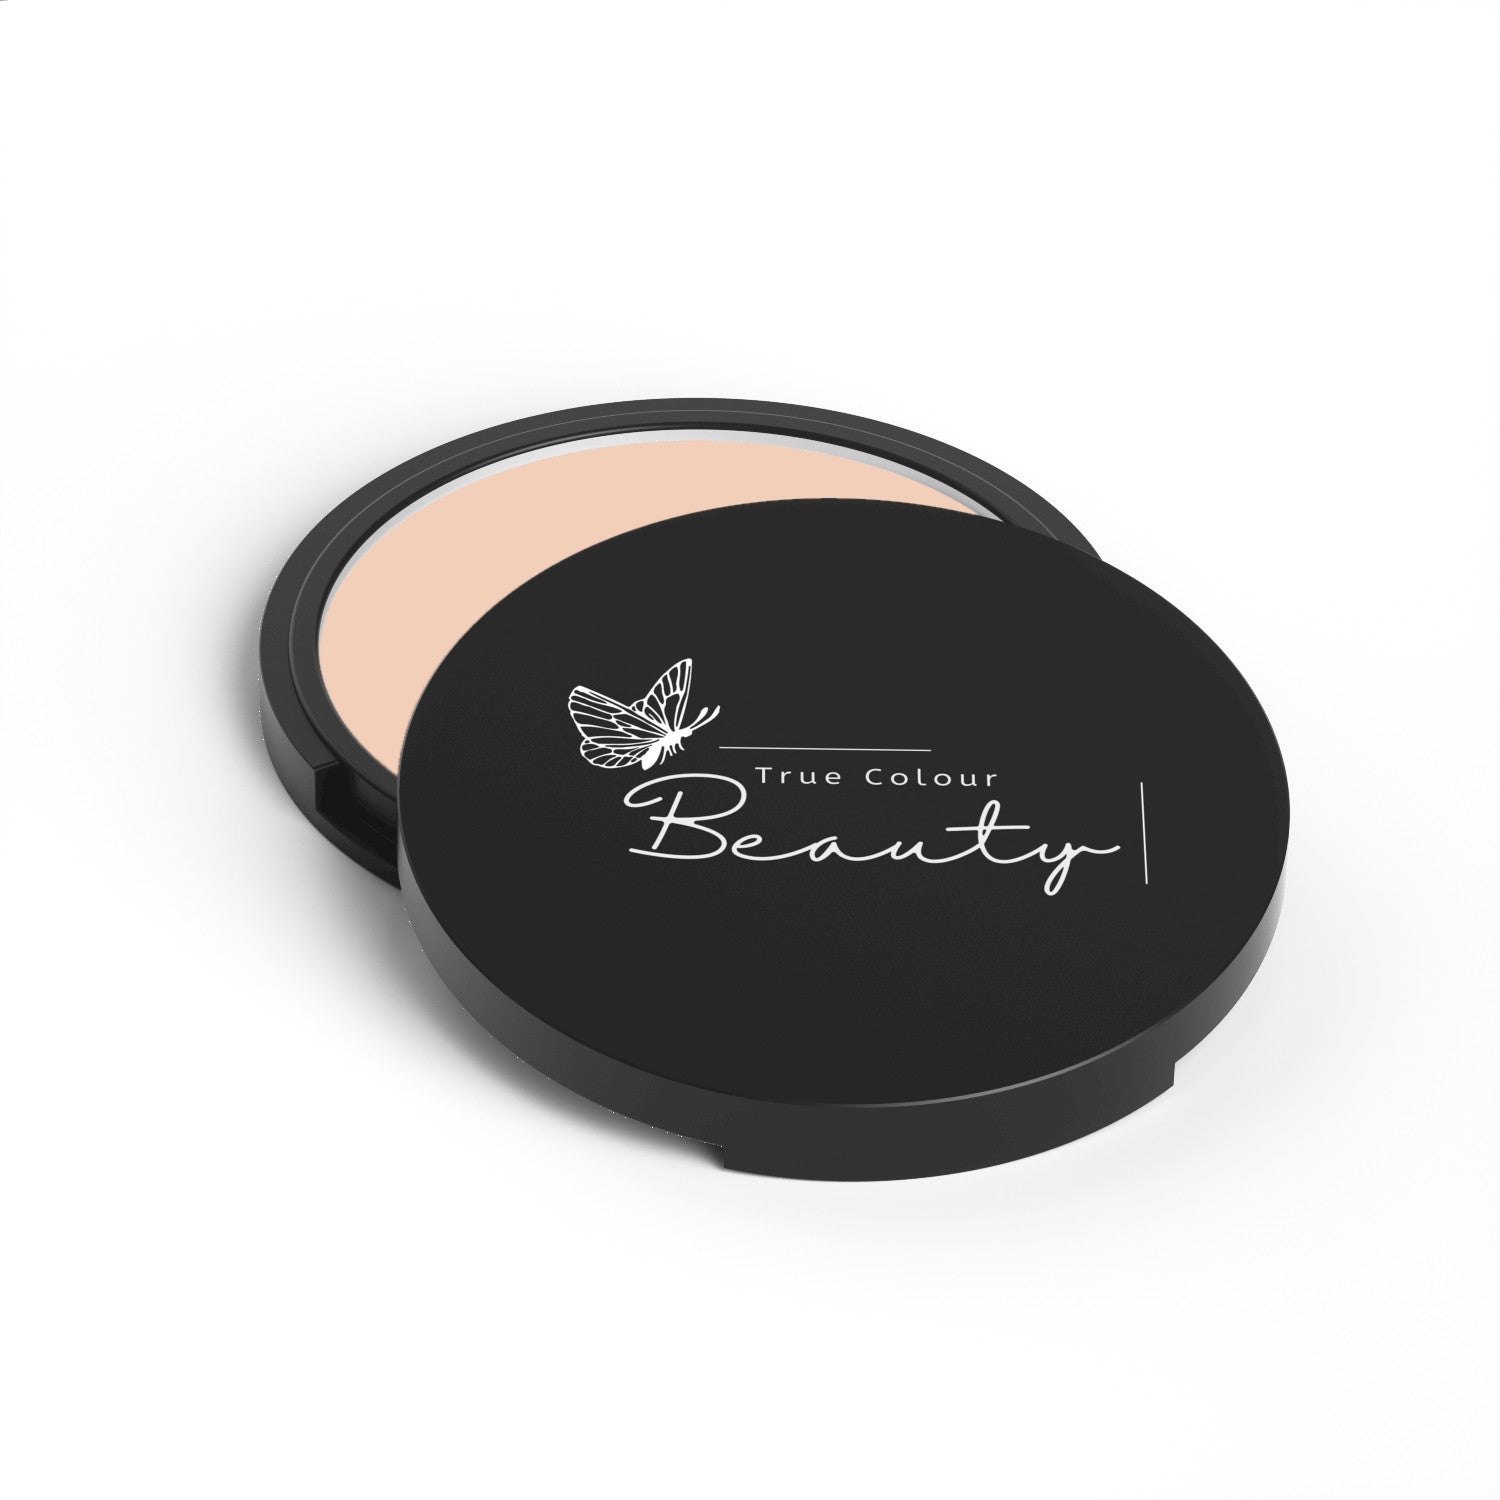 Bronzing Powder - The Perfect Balance of Red and Brown Tones